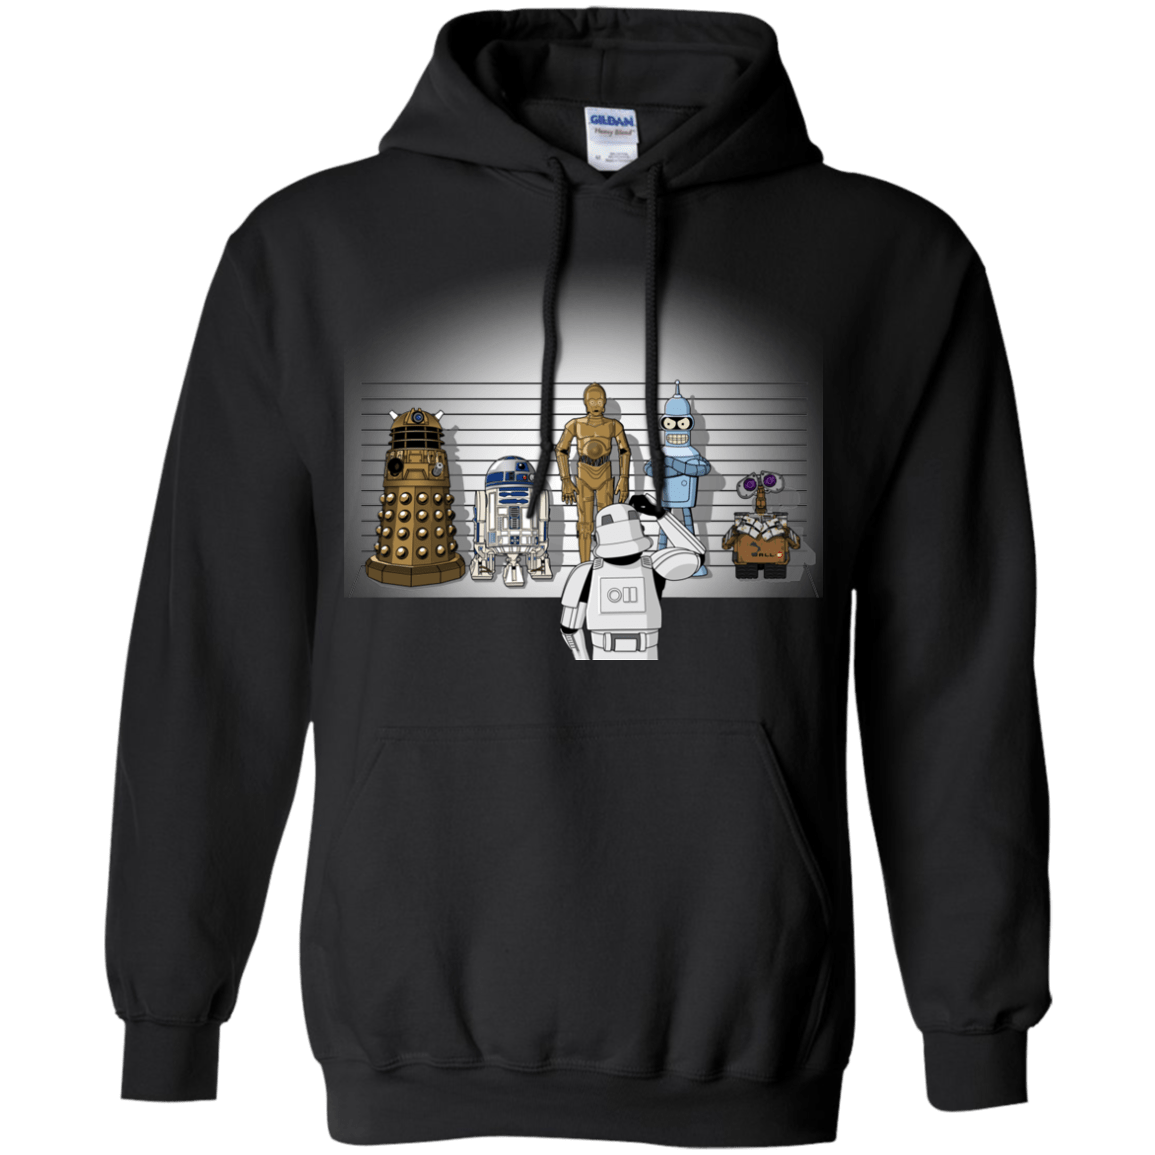 Sweatshirts Black / Small Are These Droids Pullover Hoodie